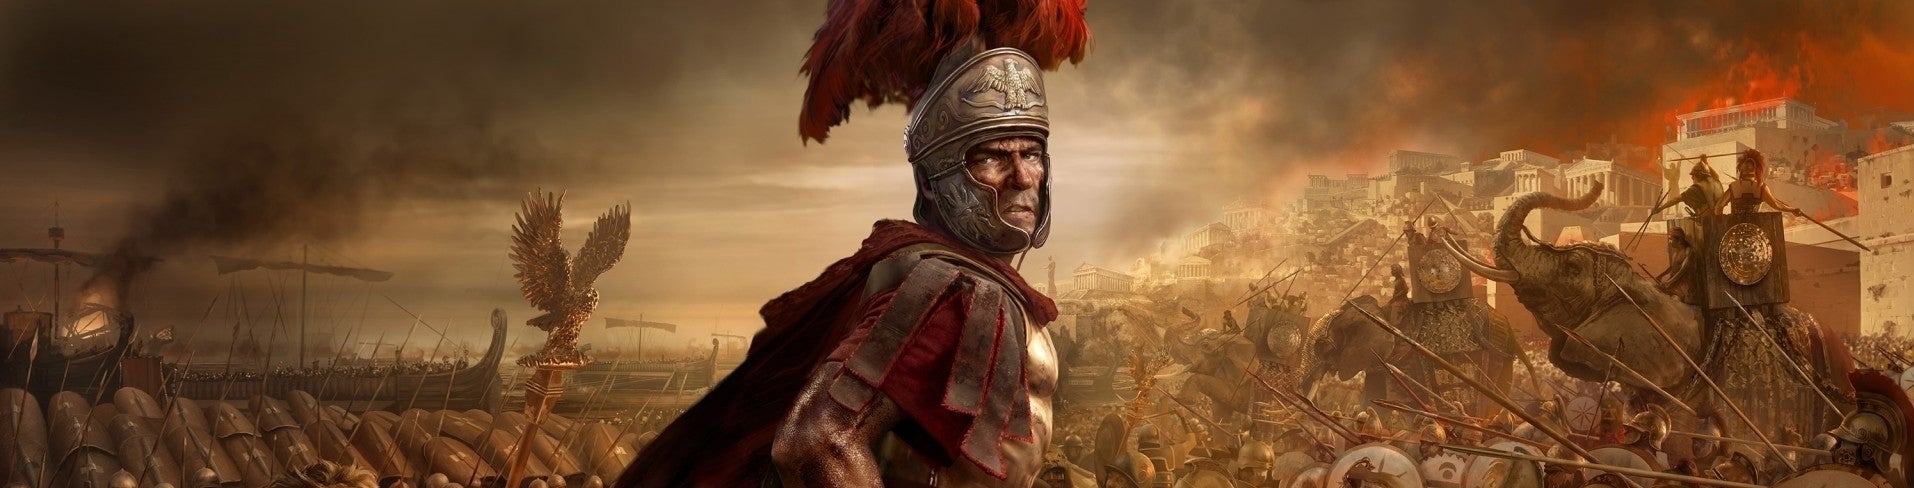 Image for RECENZE Total War: Rome 2